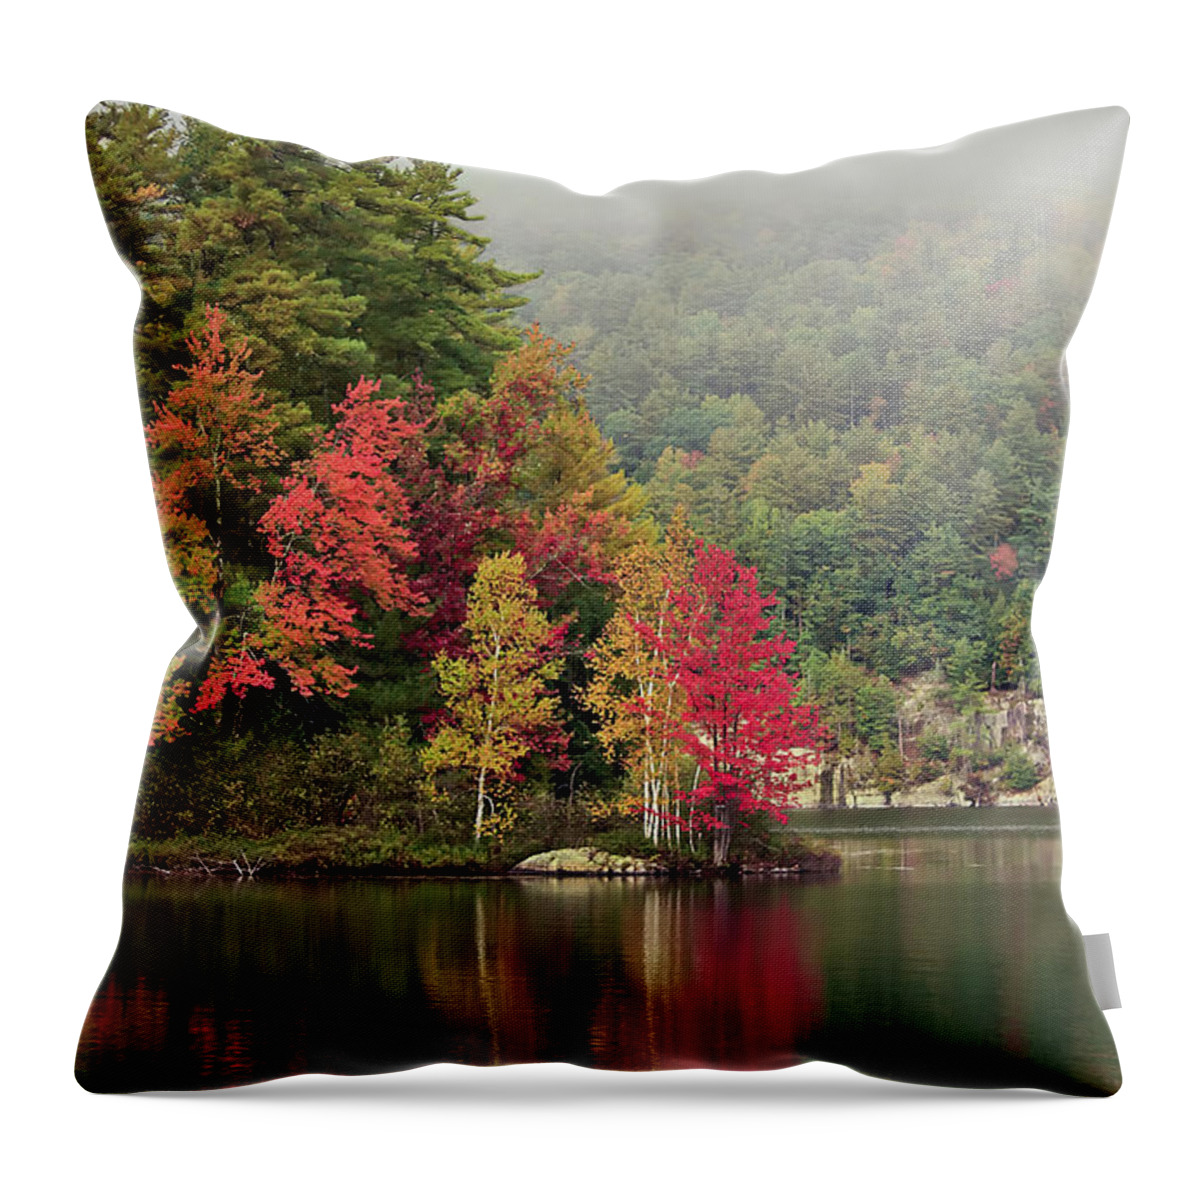 New York Throw Pillow featuring the photograph Autumn Breath by Evelina Kremsdorf